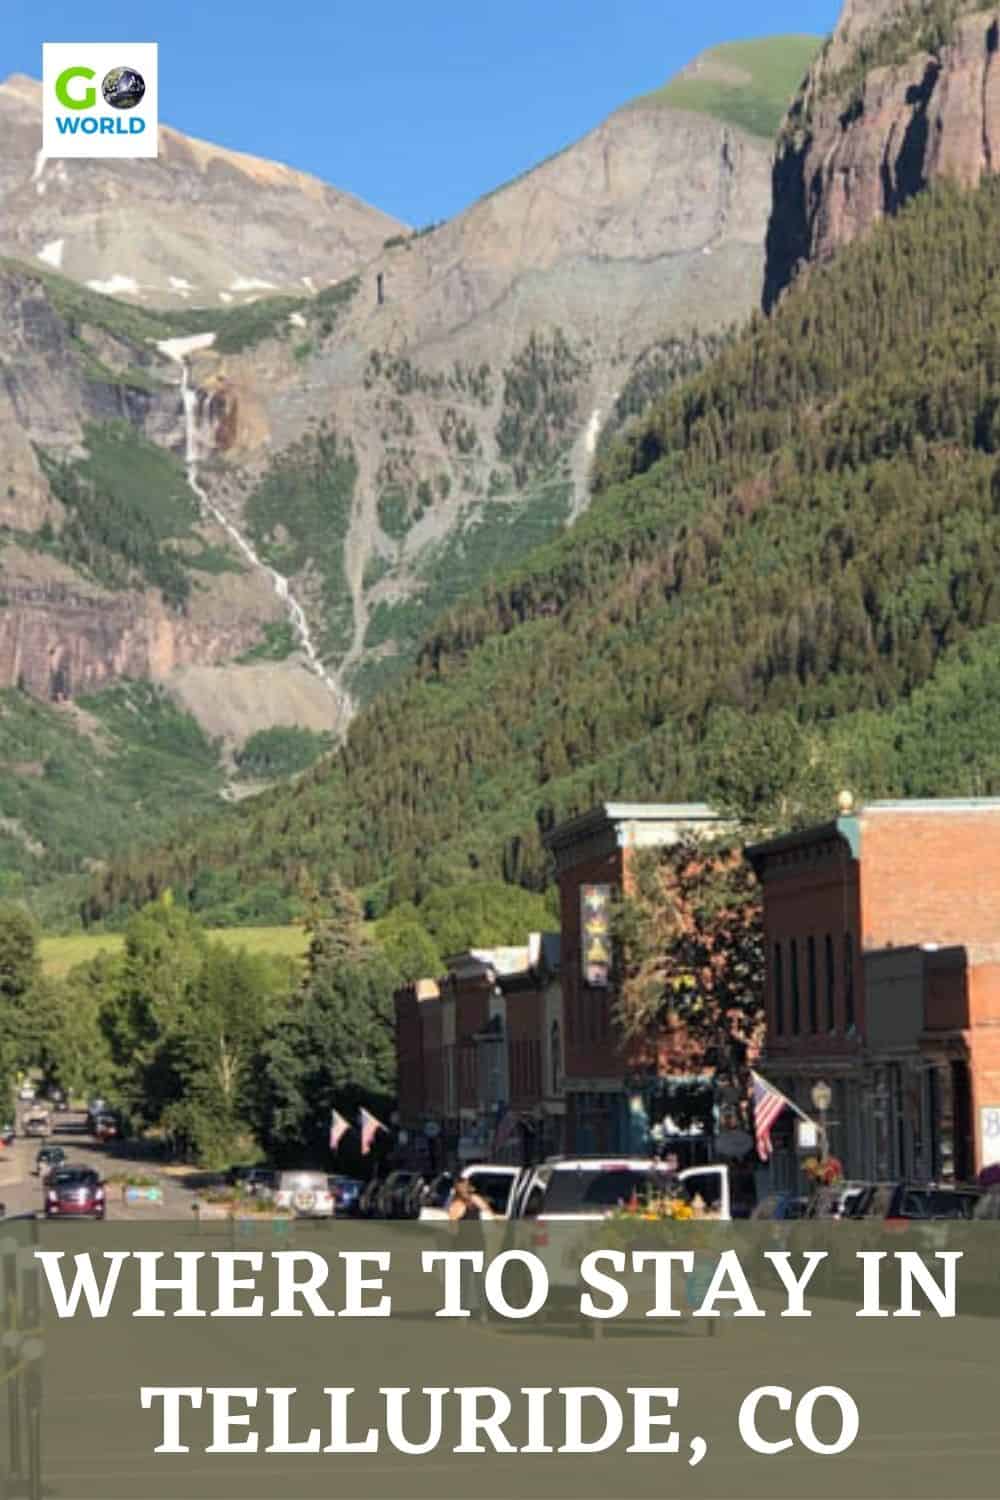 Wondering where to stay in Telluride Colorado? Learn how you can be a Kind Traveler and enjoy a luxurious stay at Lumiere with Inspirato. #Coloradotravel #Telluridecohotels #telluridecolorado